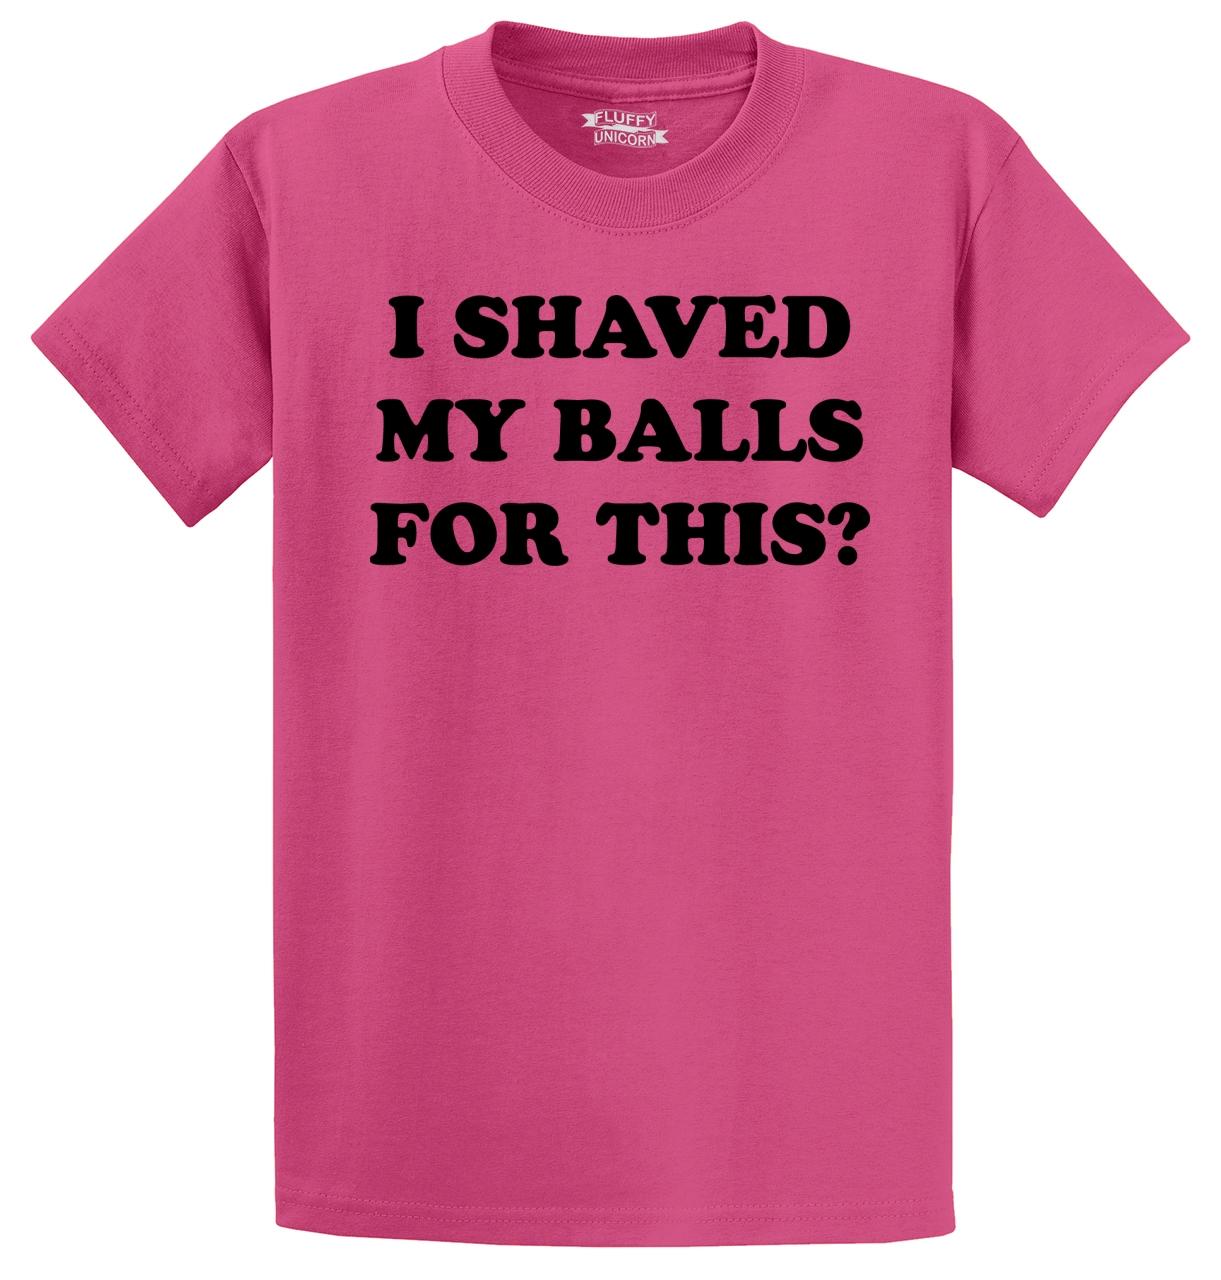 I Shaved My Balls For This Funny T Shirt Adult Humor Rude Sex Offensive Tee Ebay